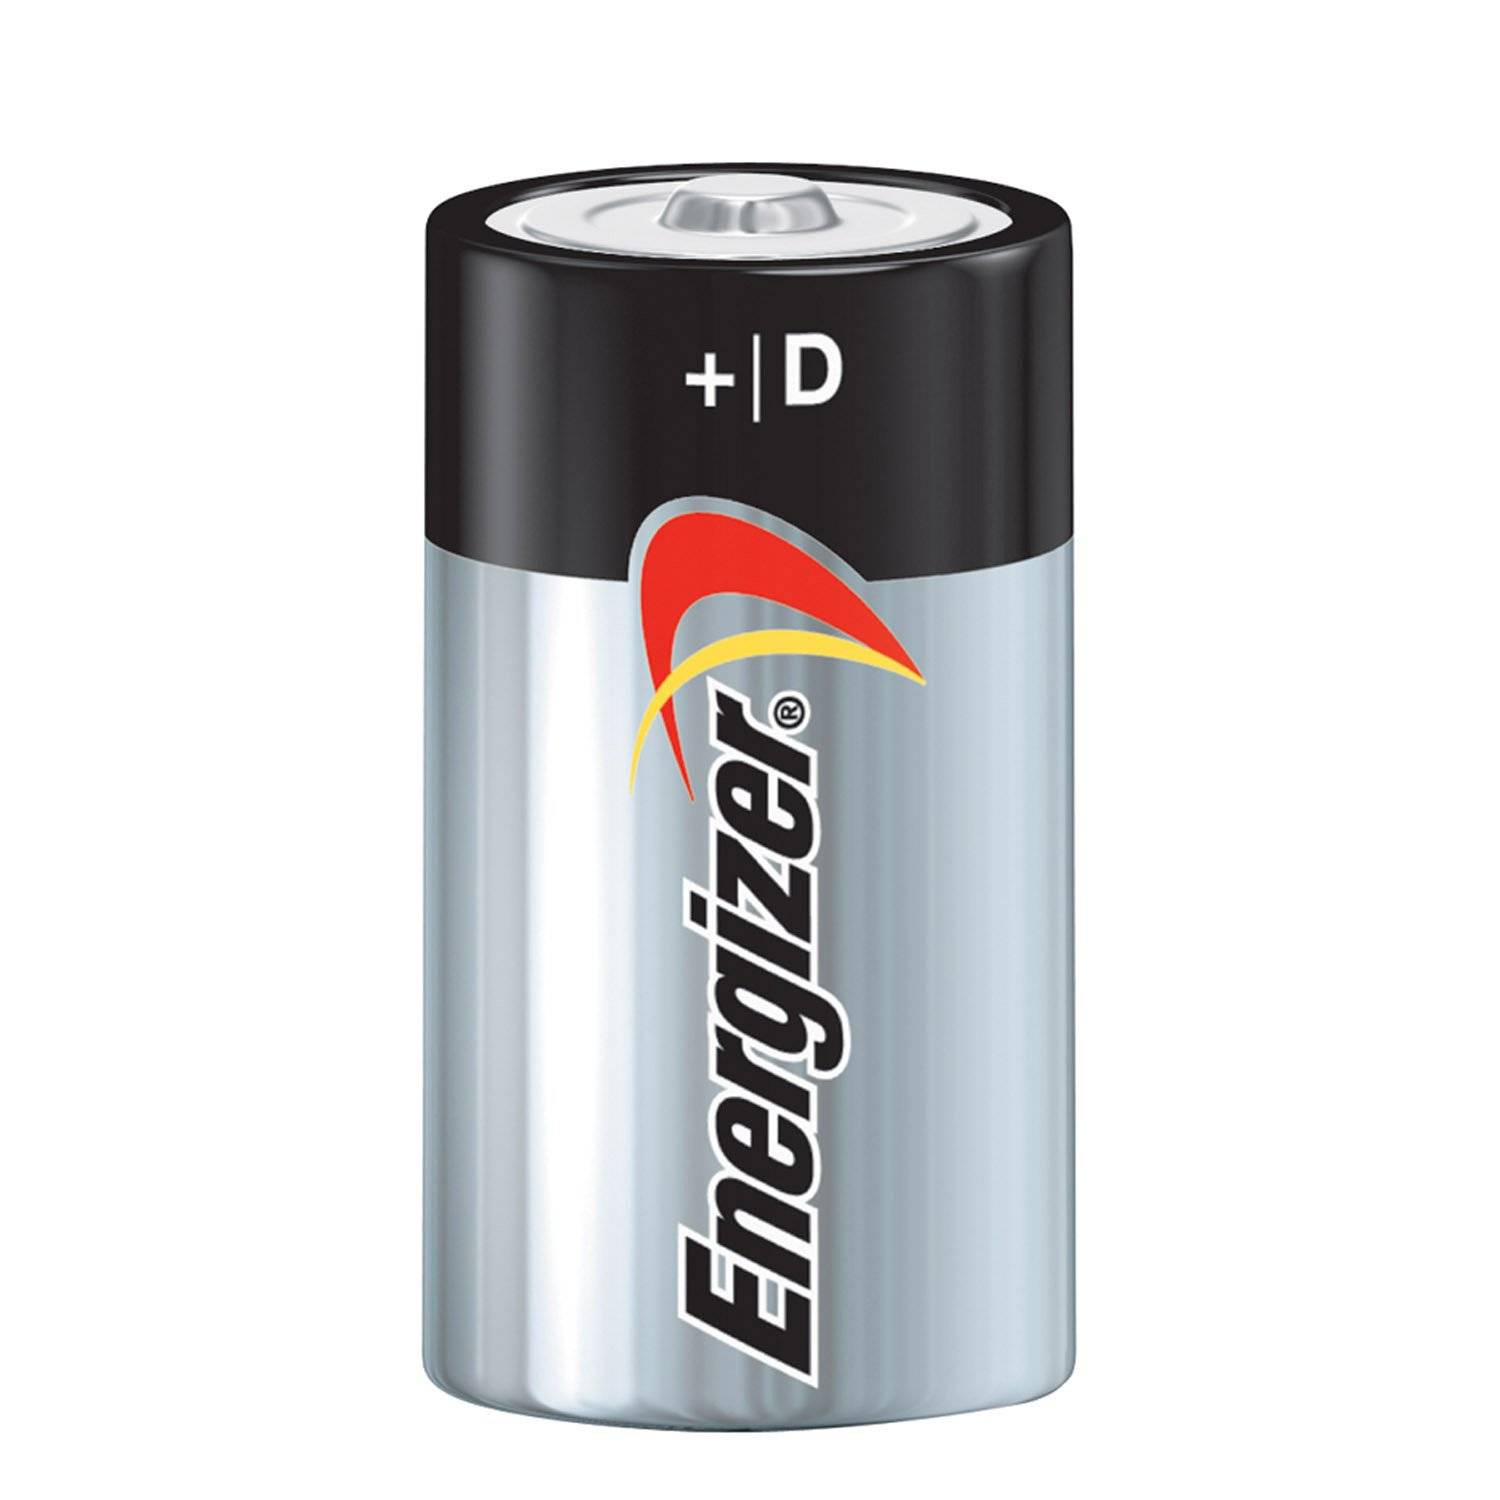 ... Batteries | Chargers | Accessories &gt; Energizer MAX D Cell Batteries (8